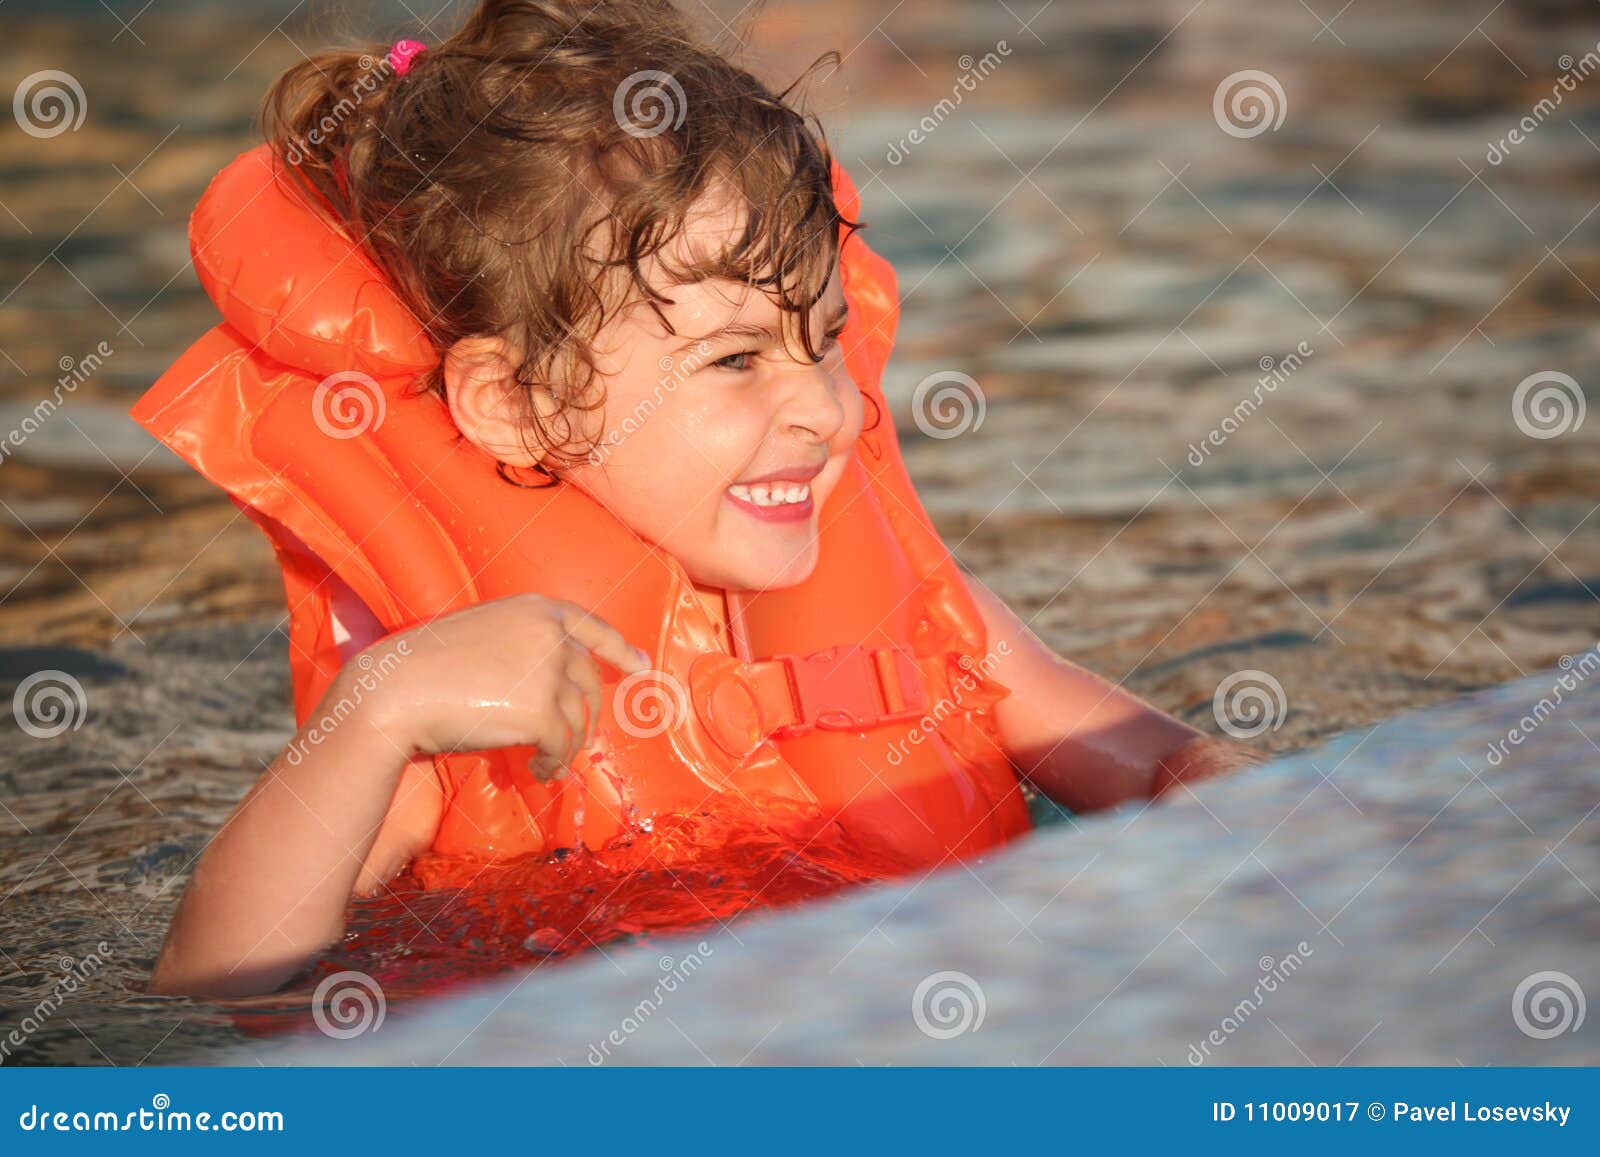 Little Girl in Inflatable Waistcoat in Pool Stock Image - Image of ...